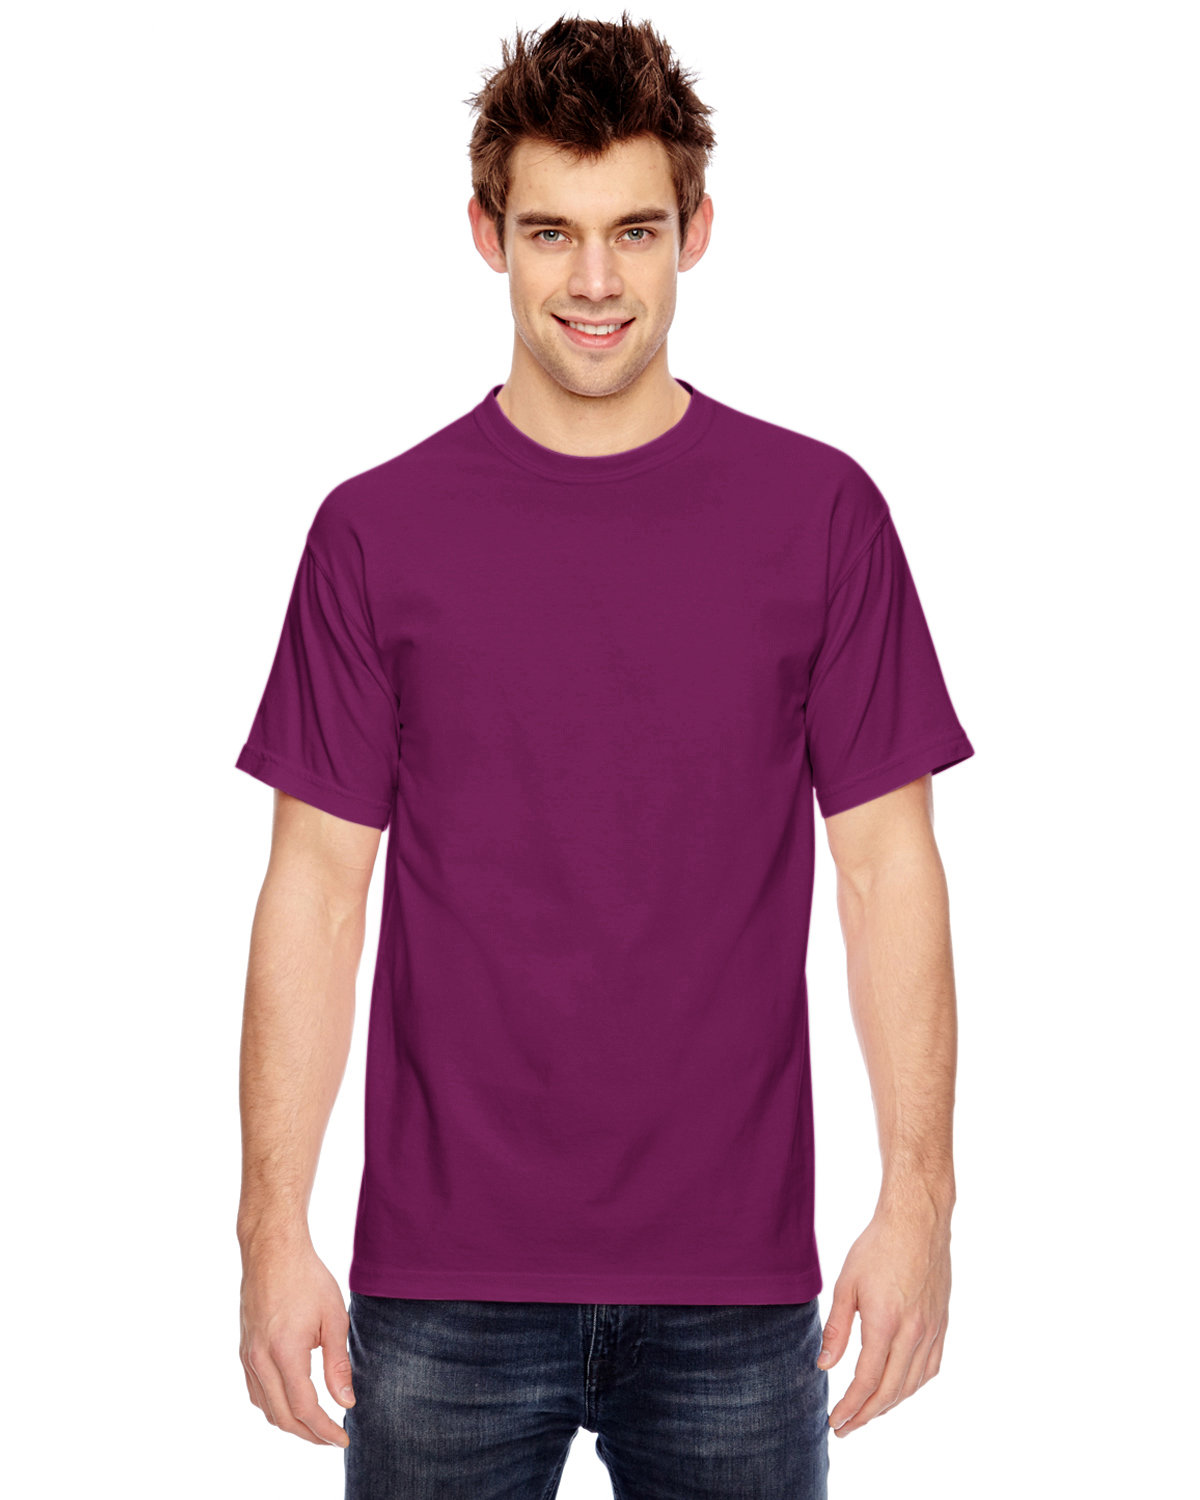 Buy Wholesale Colored T-Shirts in Bulk